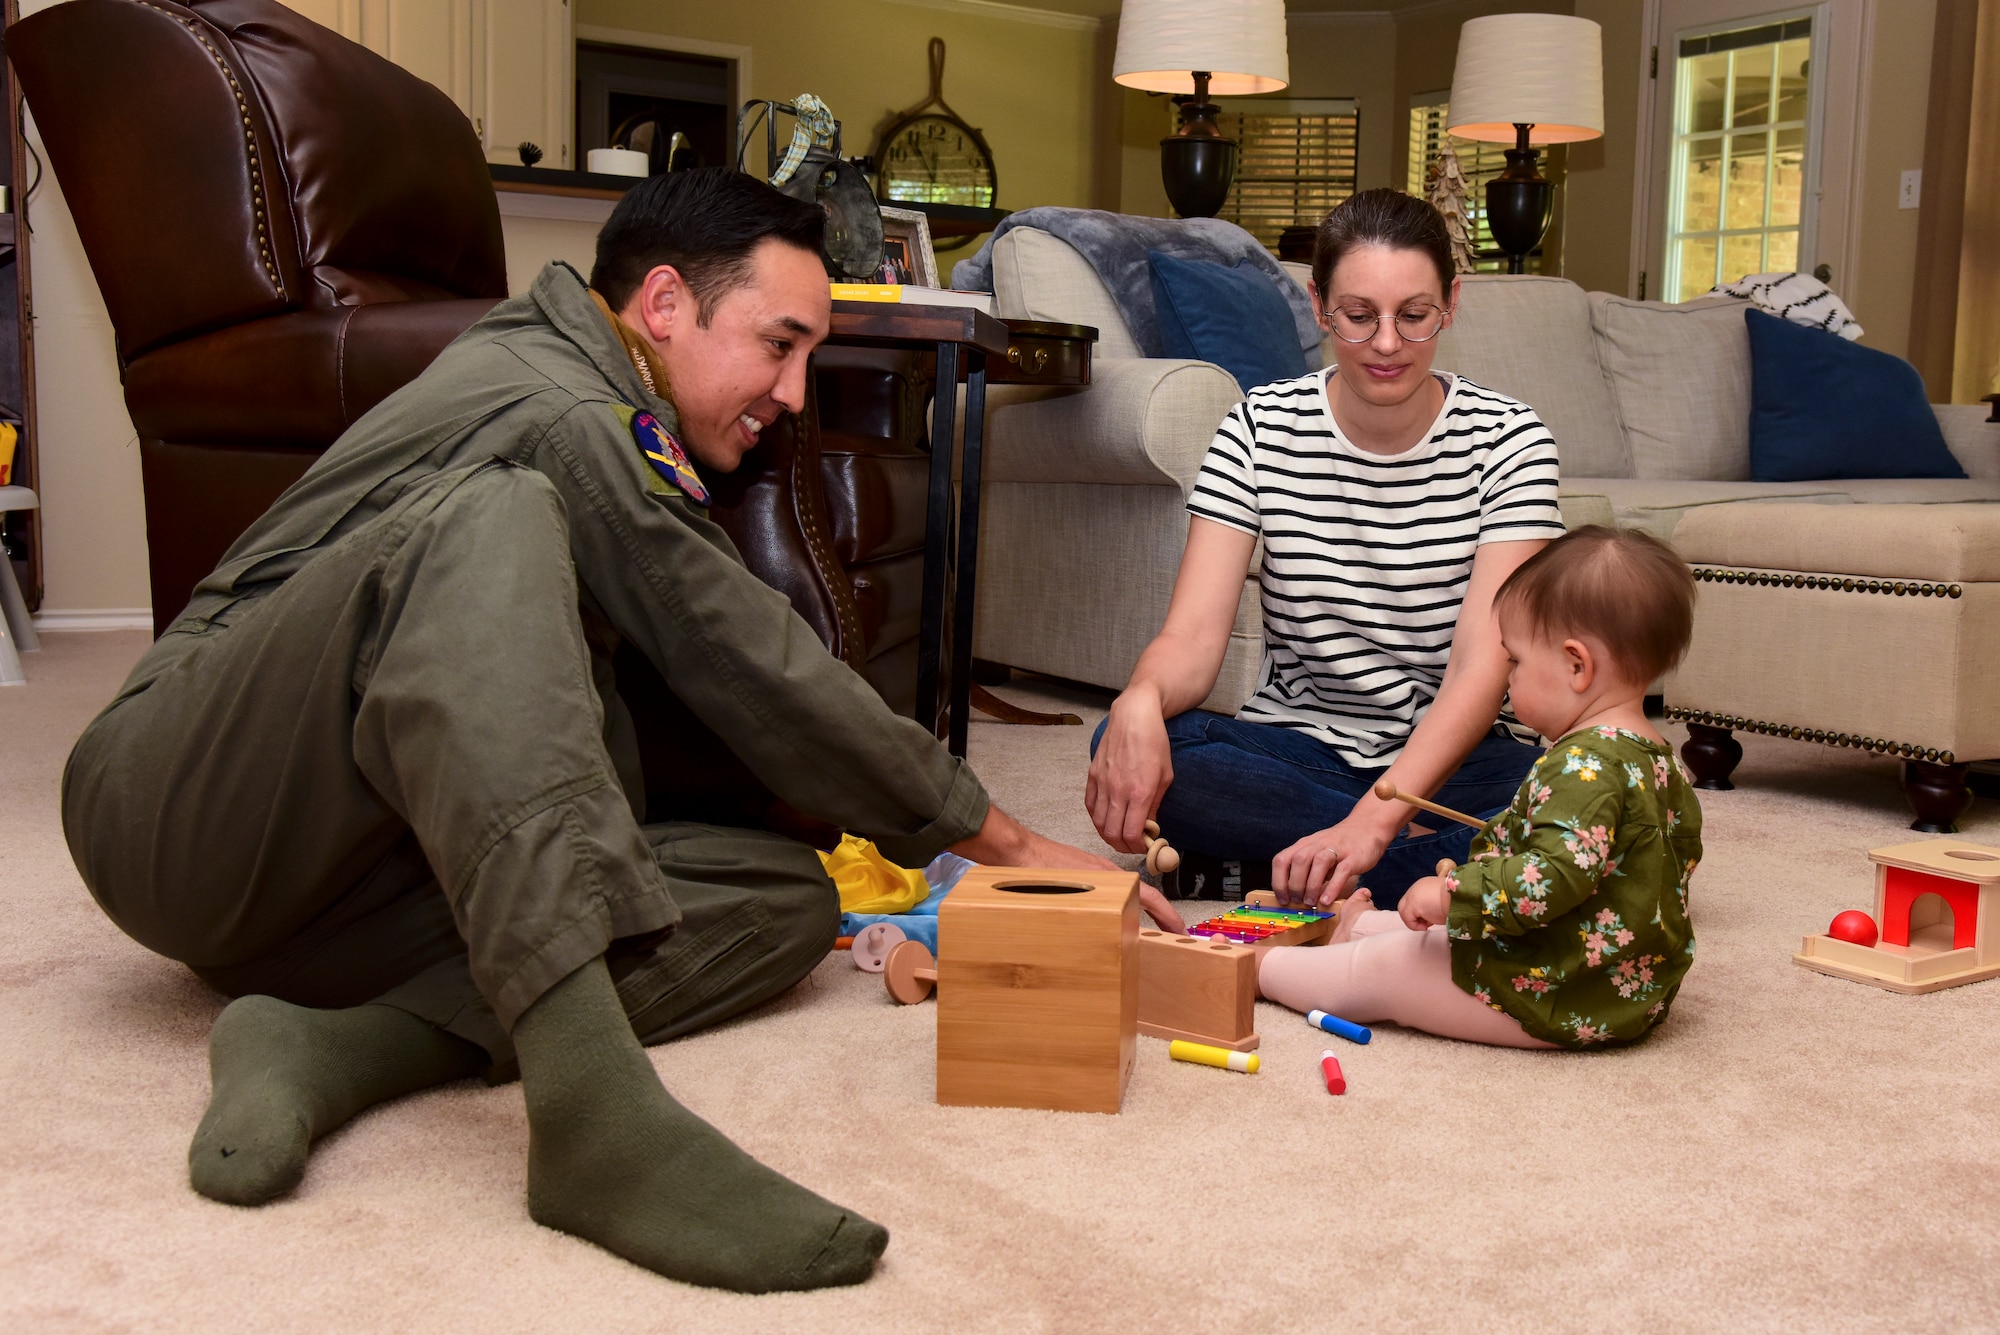 Capt. Joshua White, 434th Flying Training Squadron X flight commander and instructor pilot, Candice White, his wife and Dylan their daughter, spend some quality time together before work, April 23, 2020 in Del Rio, Texas. During quarantine, they enjoy going on walks, playing in the living room and video chatting with family who lives farther away. “Spending time with my family has always been important to me and is even more important now,” White said. “This pandemic has made me more thankful for the small things in life and appreciative of the present.” (U.S. Air Force photo by Senior Airman Anne McCready)